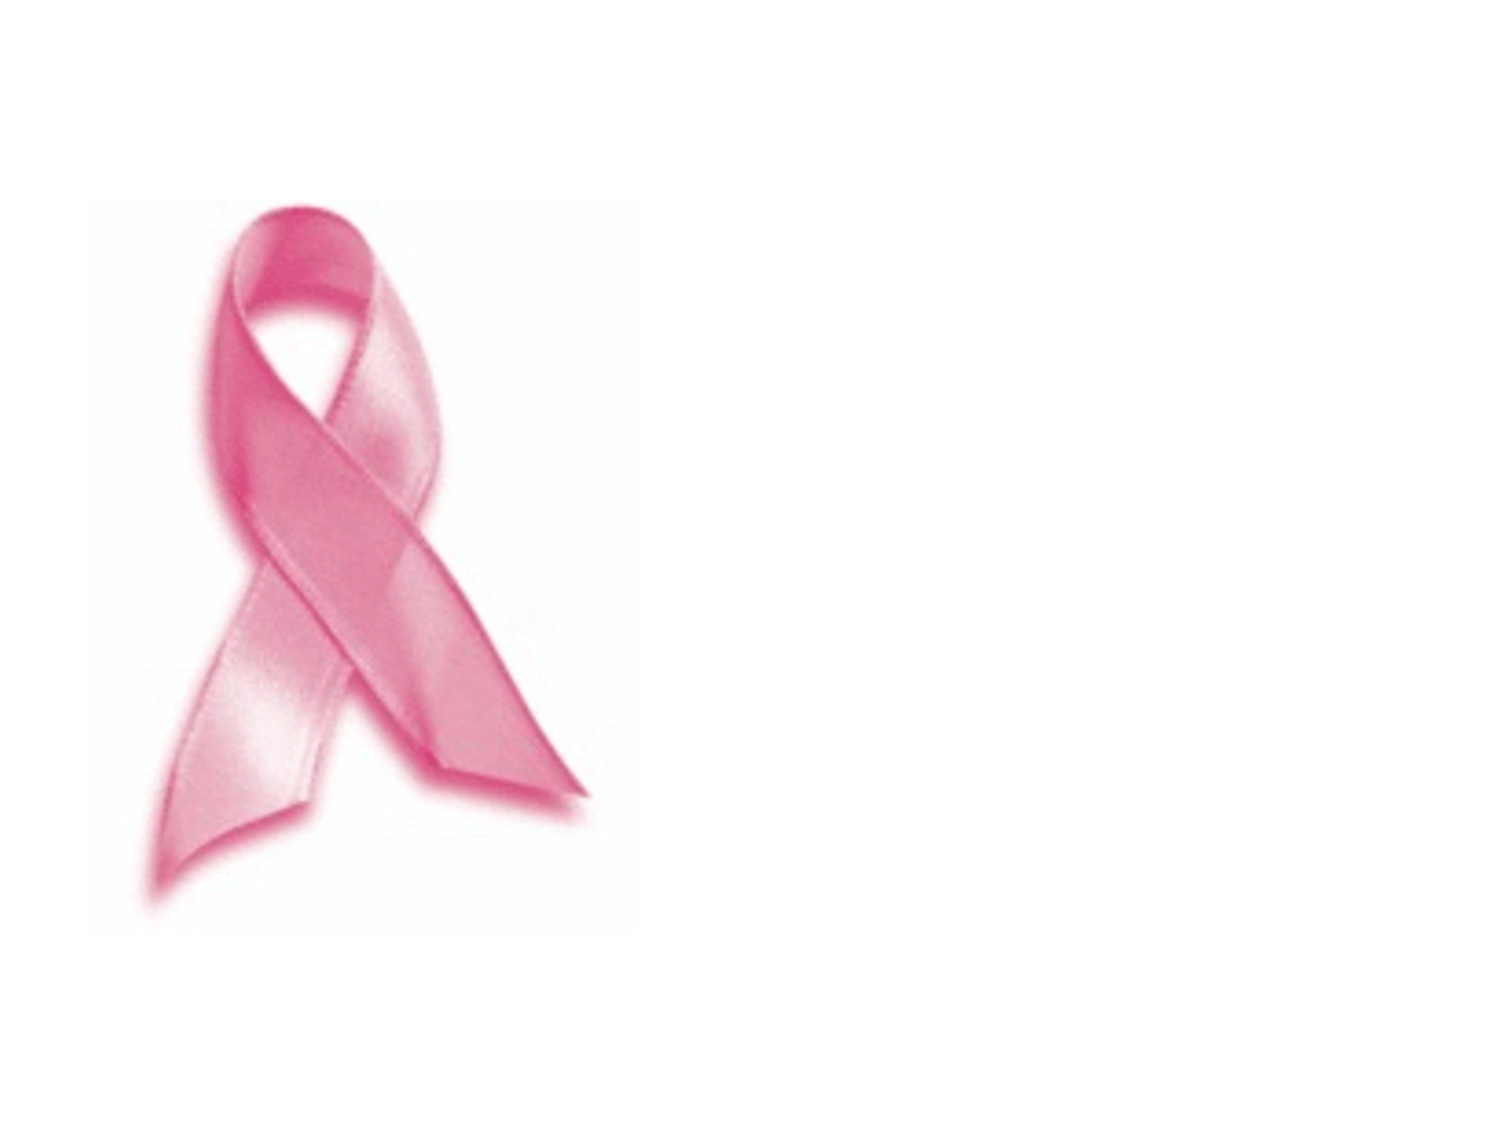 Breast Cancer Powerpoint Template Backgrounds 01459. Breast Pertaining To Free Breast Cancer Powerpoint Templates